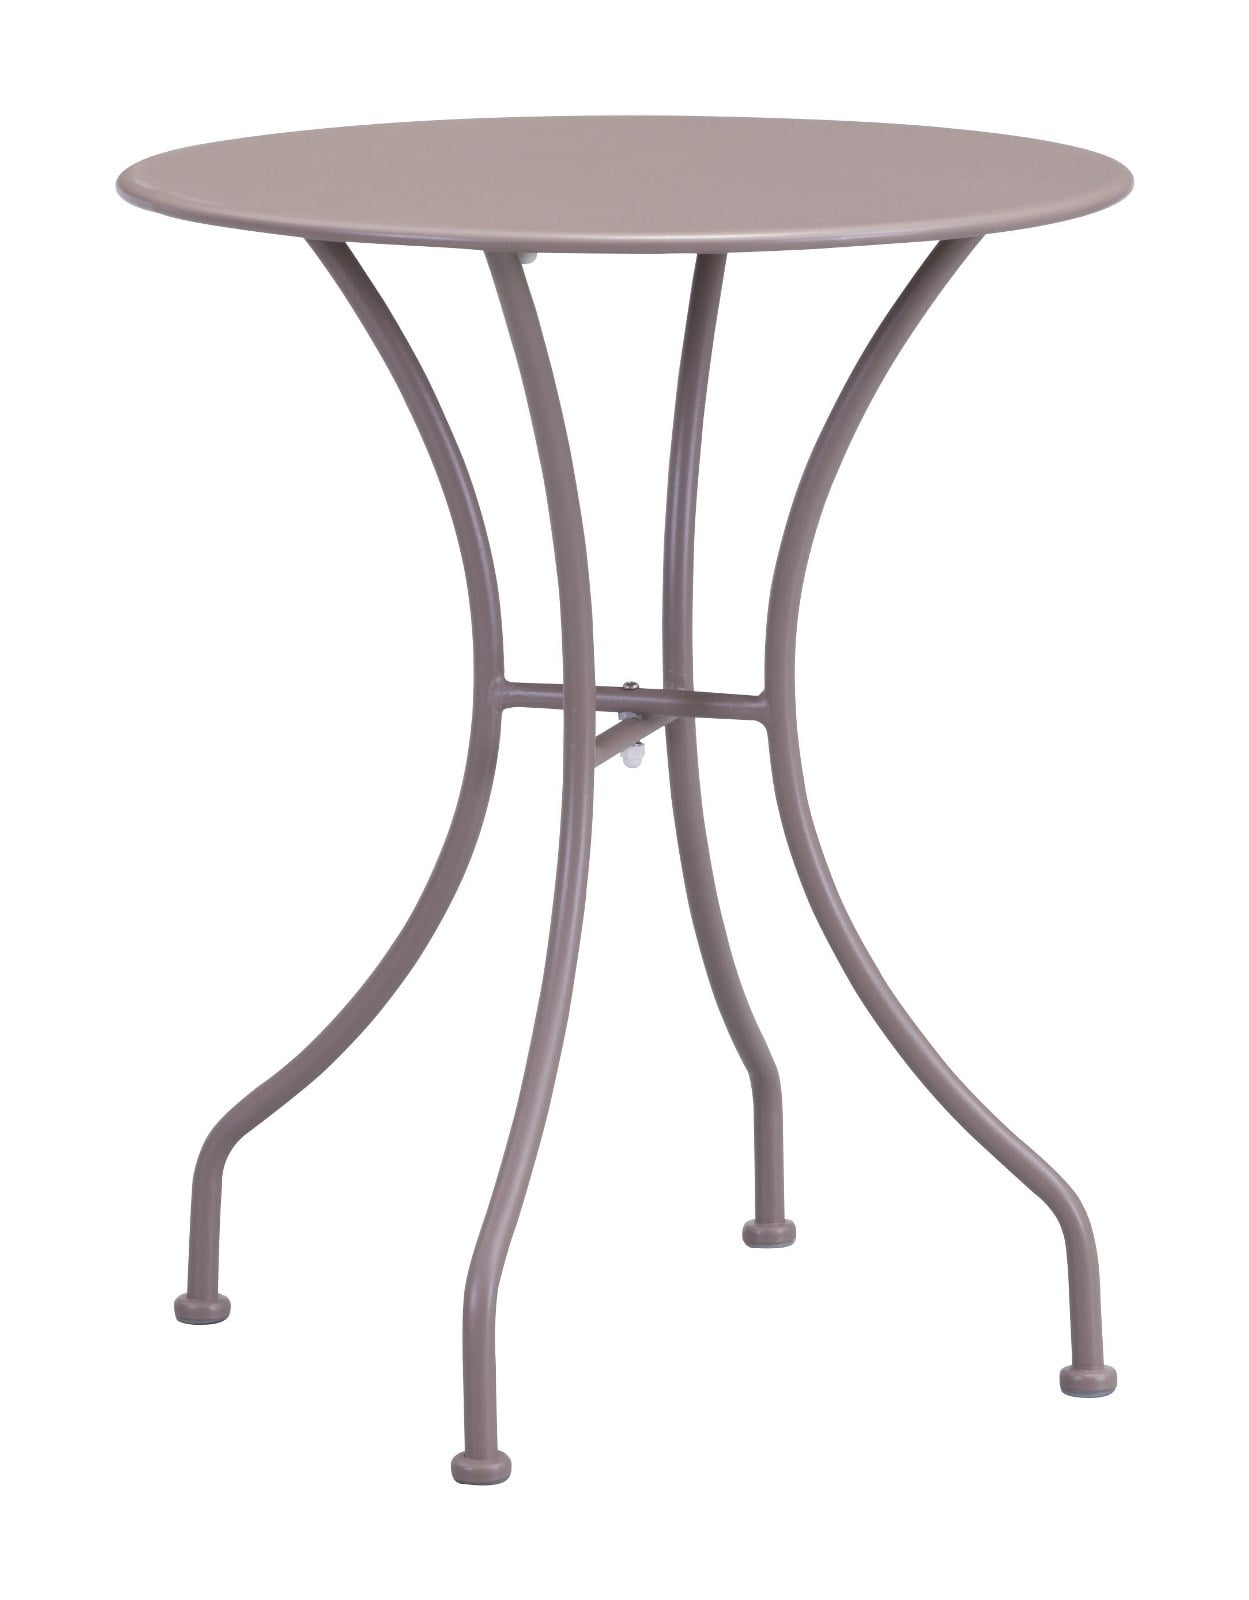 Modern Contemporary Outdoor Patio Dining Round Table, Beige, Metal